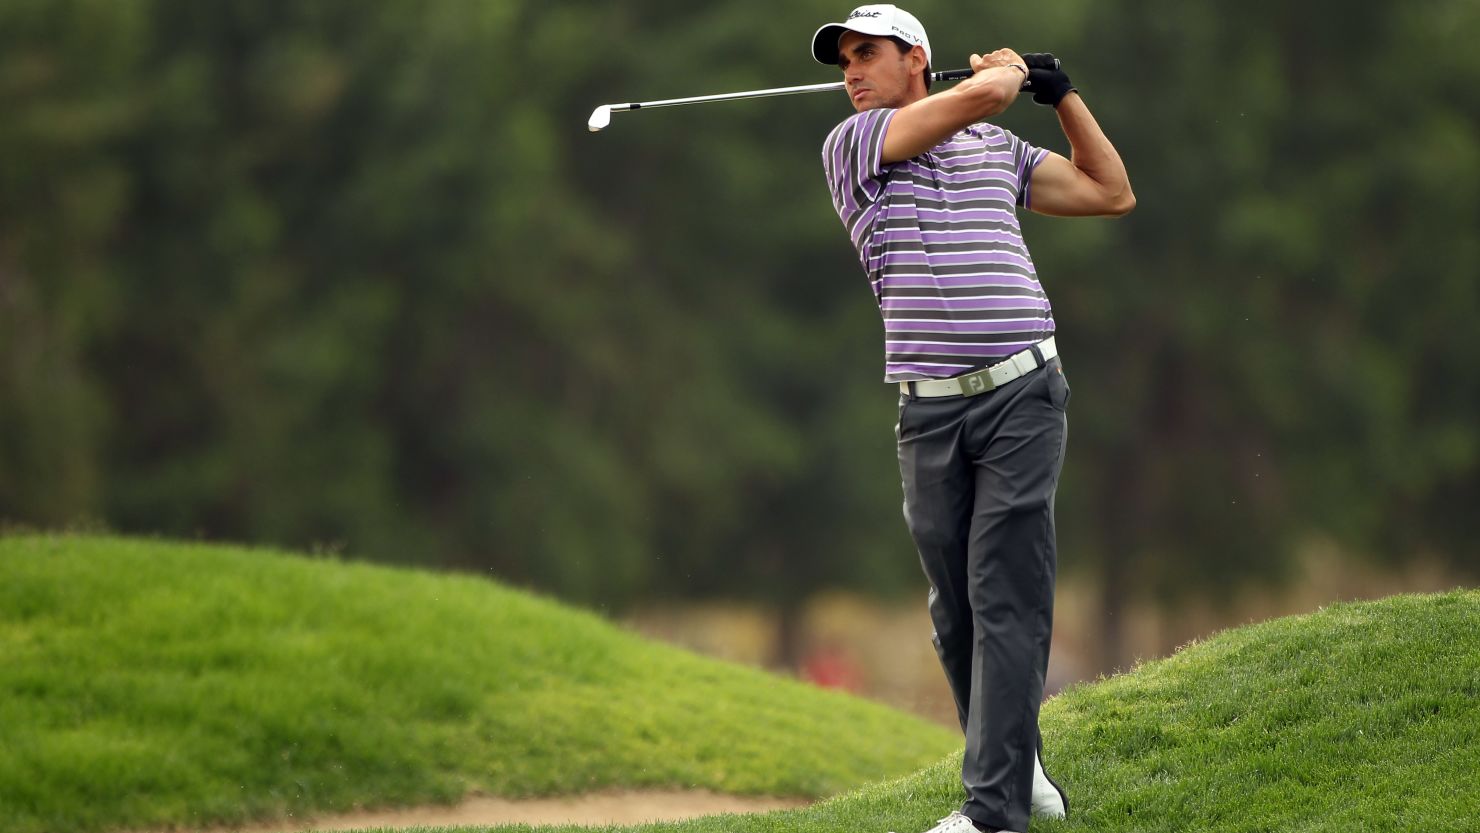 Spain's Rafael Cabrera-Bello leads an impressive field at the Dubai Desert Classic after the opening round Thursday.